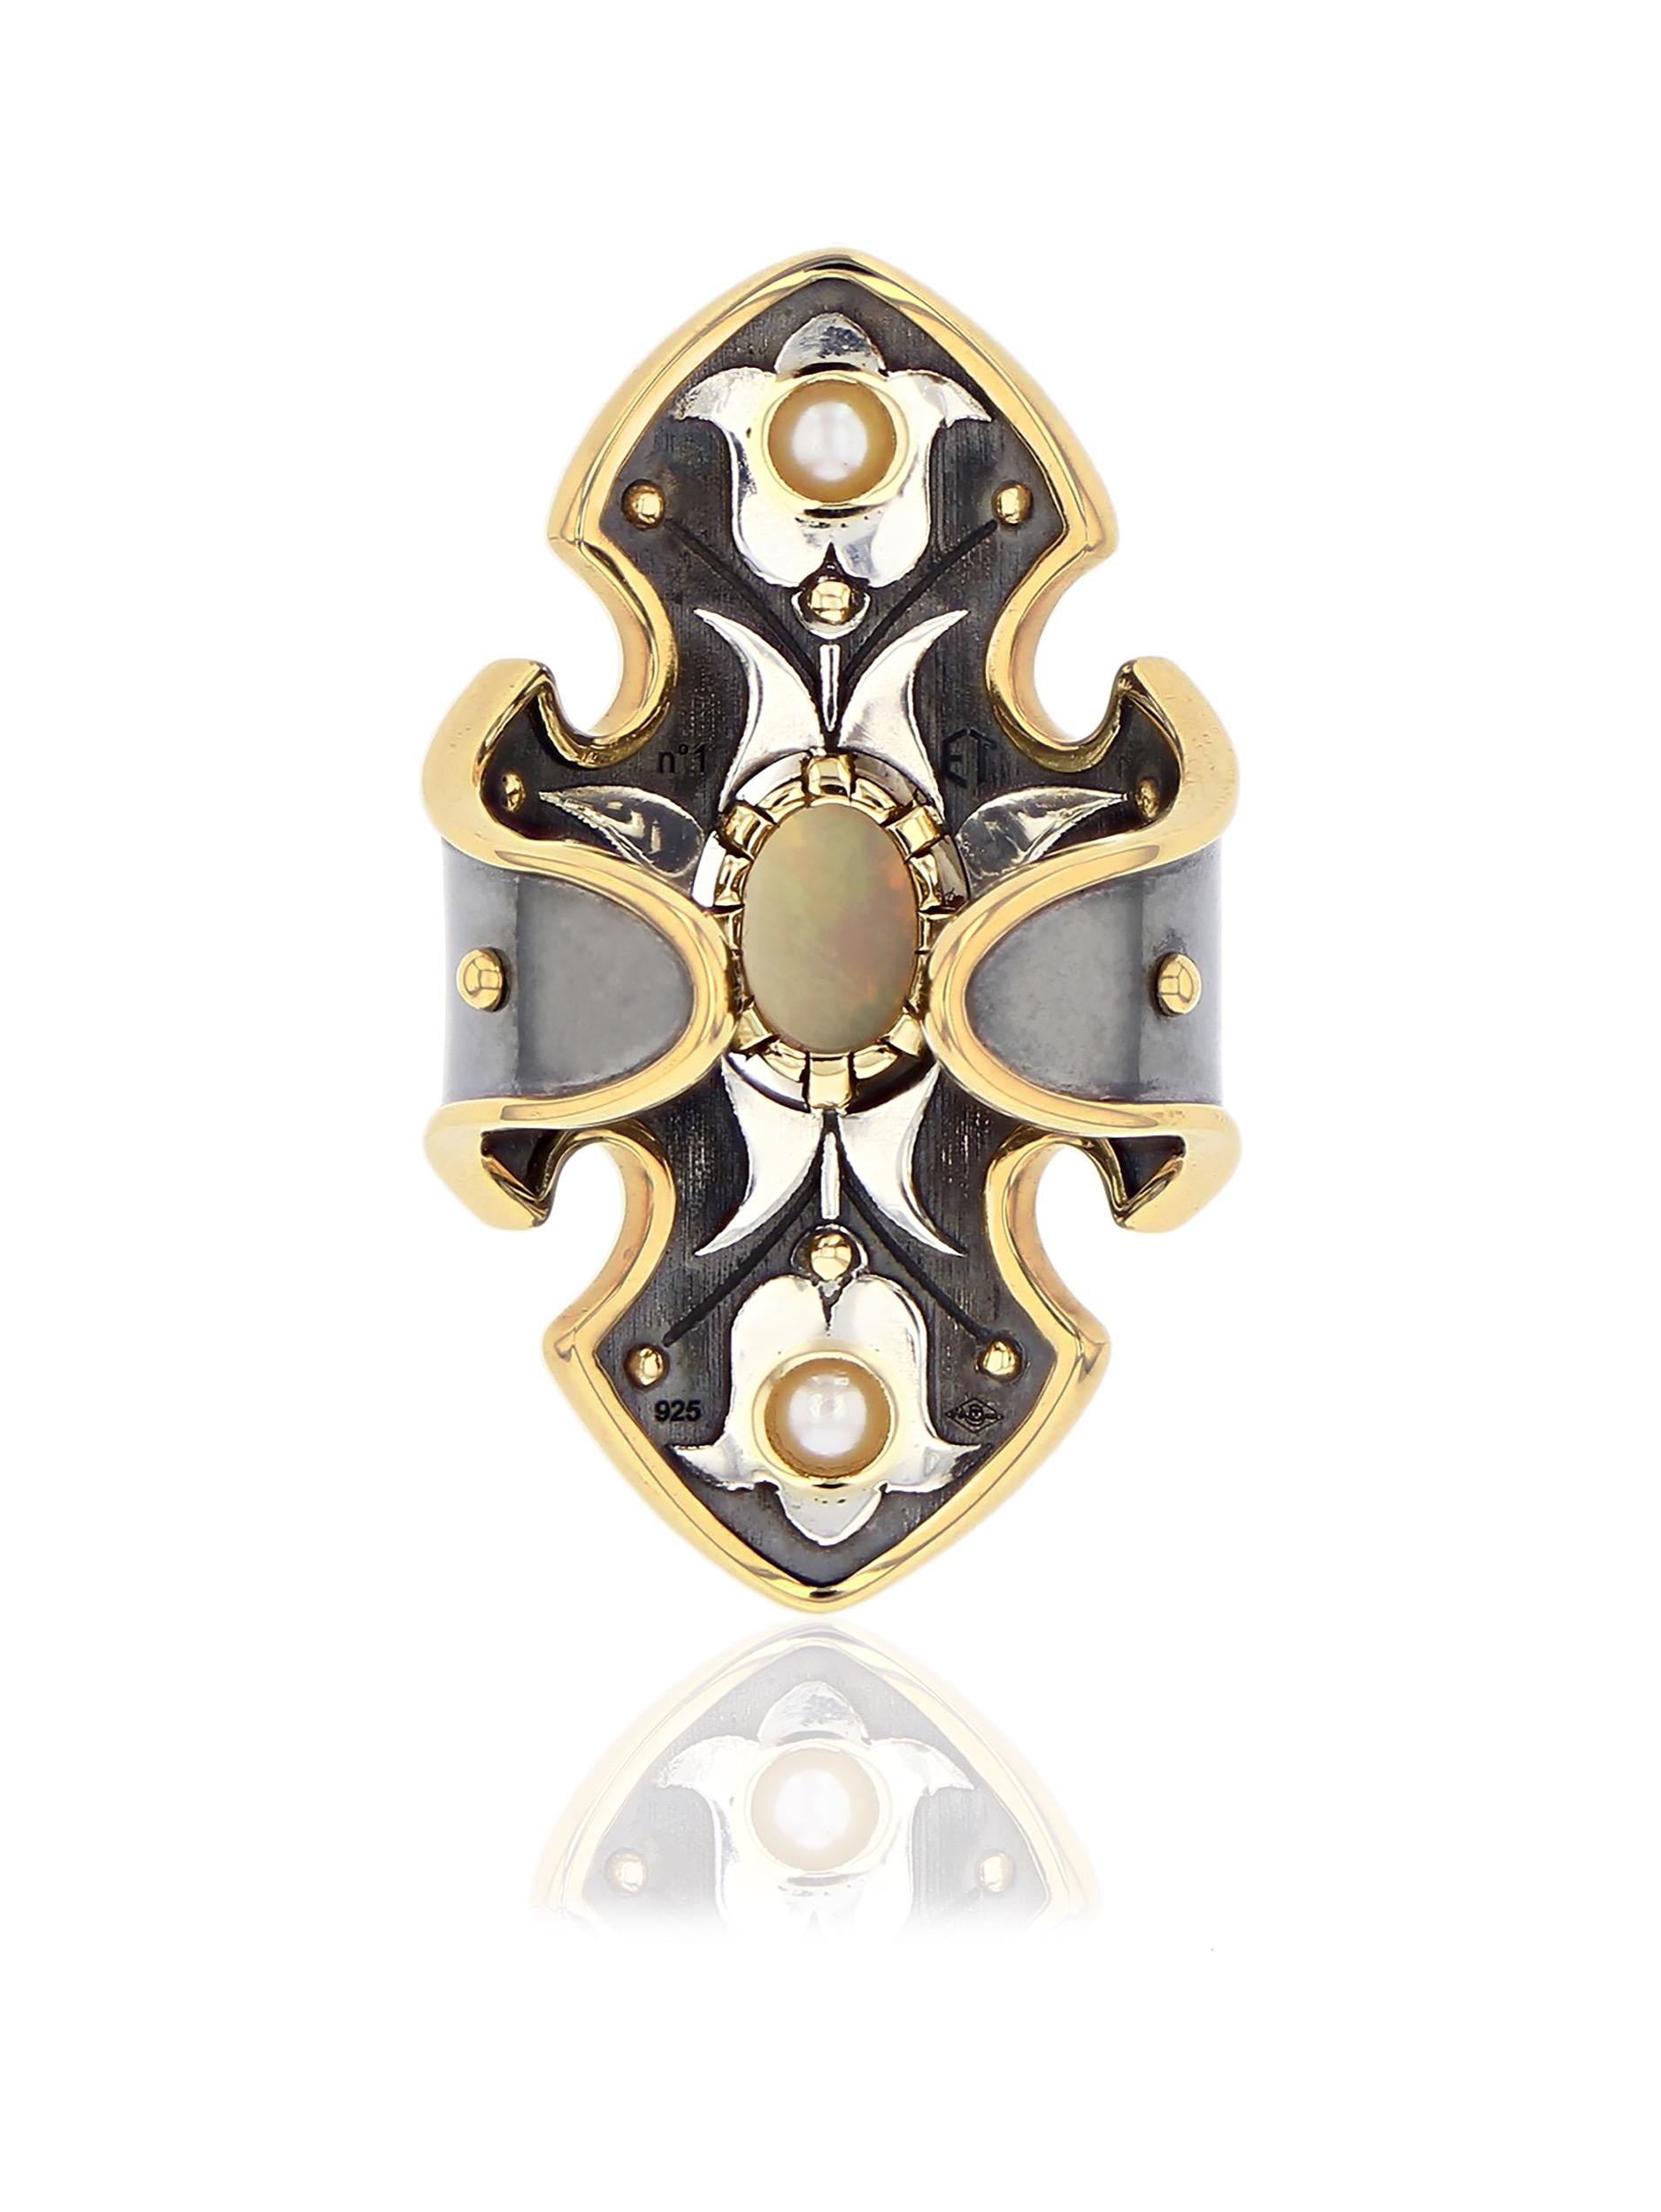 Bague Bouclier Opale Or Jaune Diamants

Patined silver shield-shaped ring rail whose contours and claws are in yellow gold. It is set with an opal encercled with diamond in its center, 12 gold spikes, 2 topazes and 2 Akoya pearls. Inside the ring is